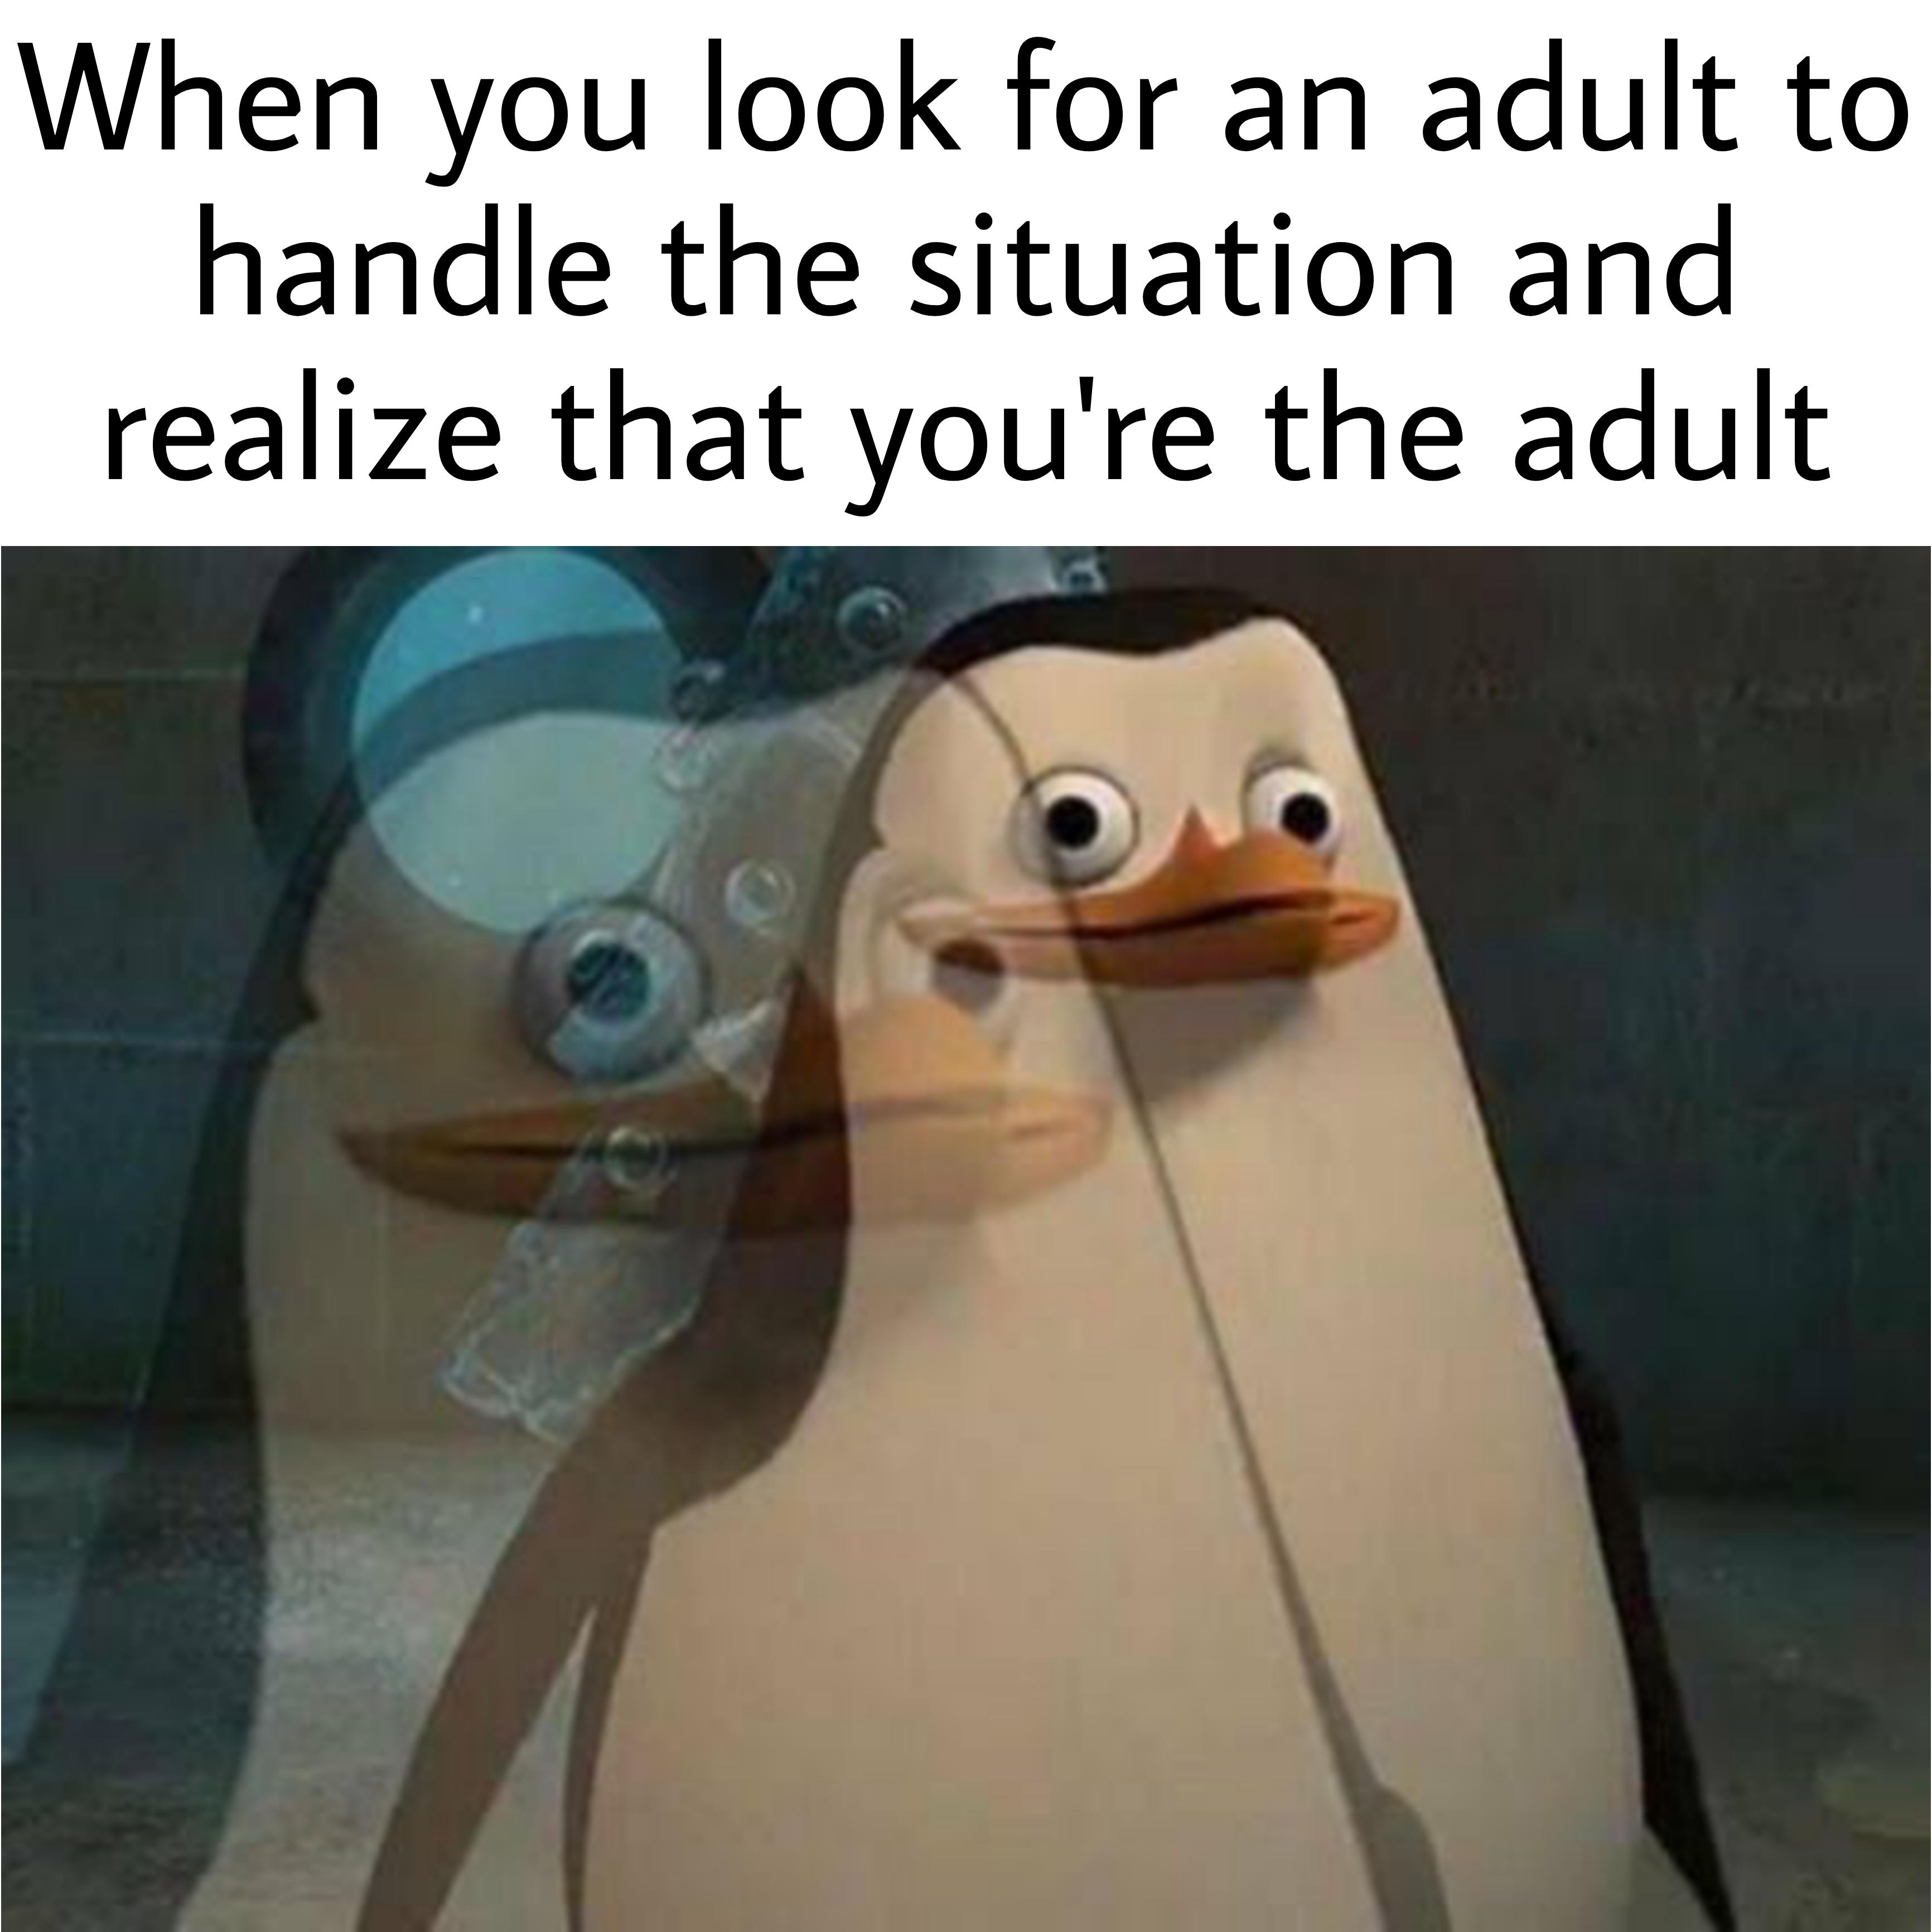 funny memes - dank memes - penguin meme - a When you look for an adult to handle the situation and realize that you're the adult a